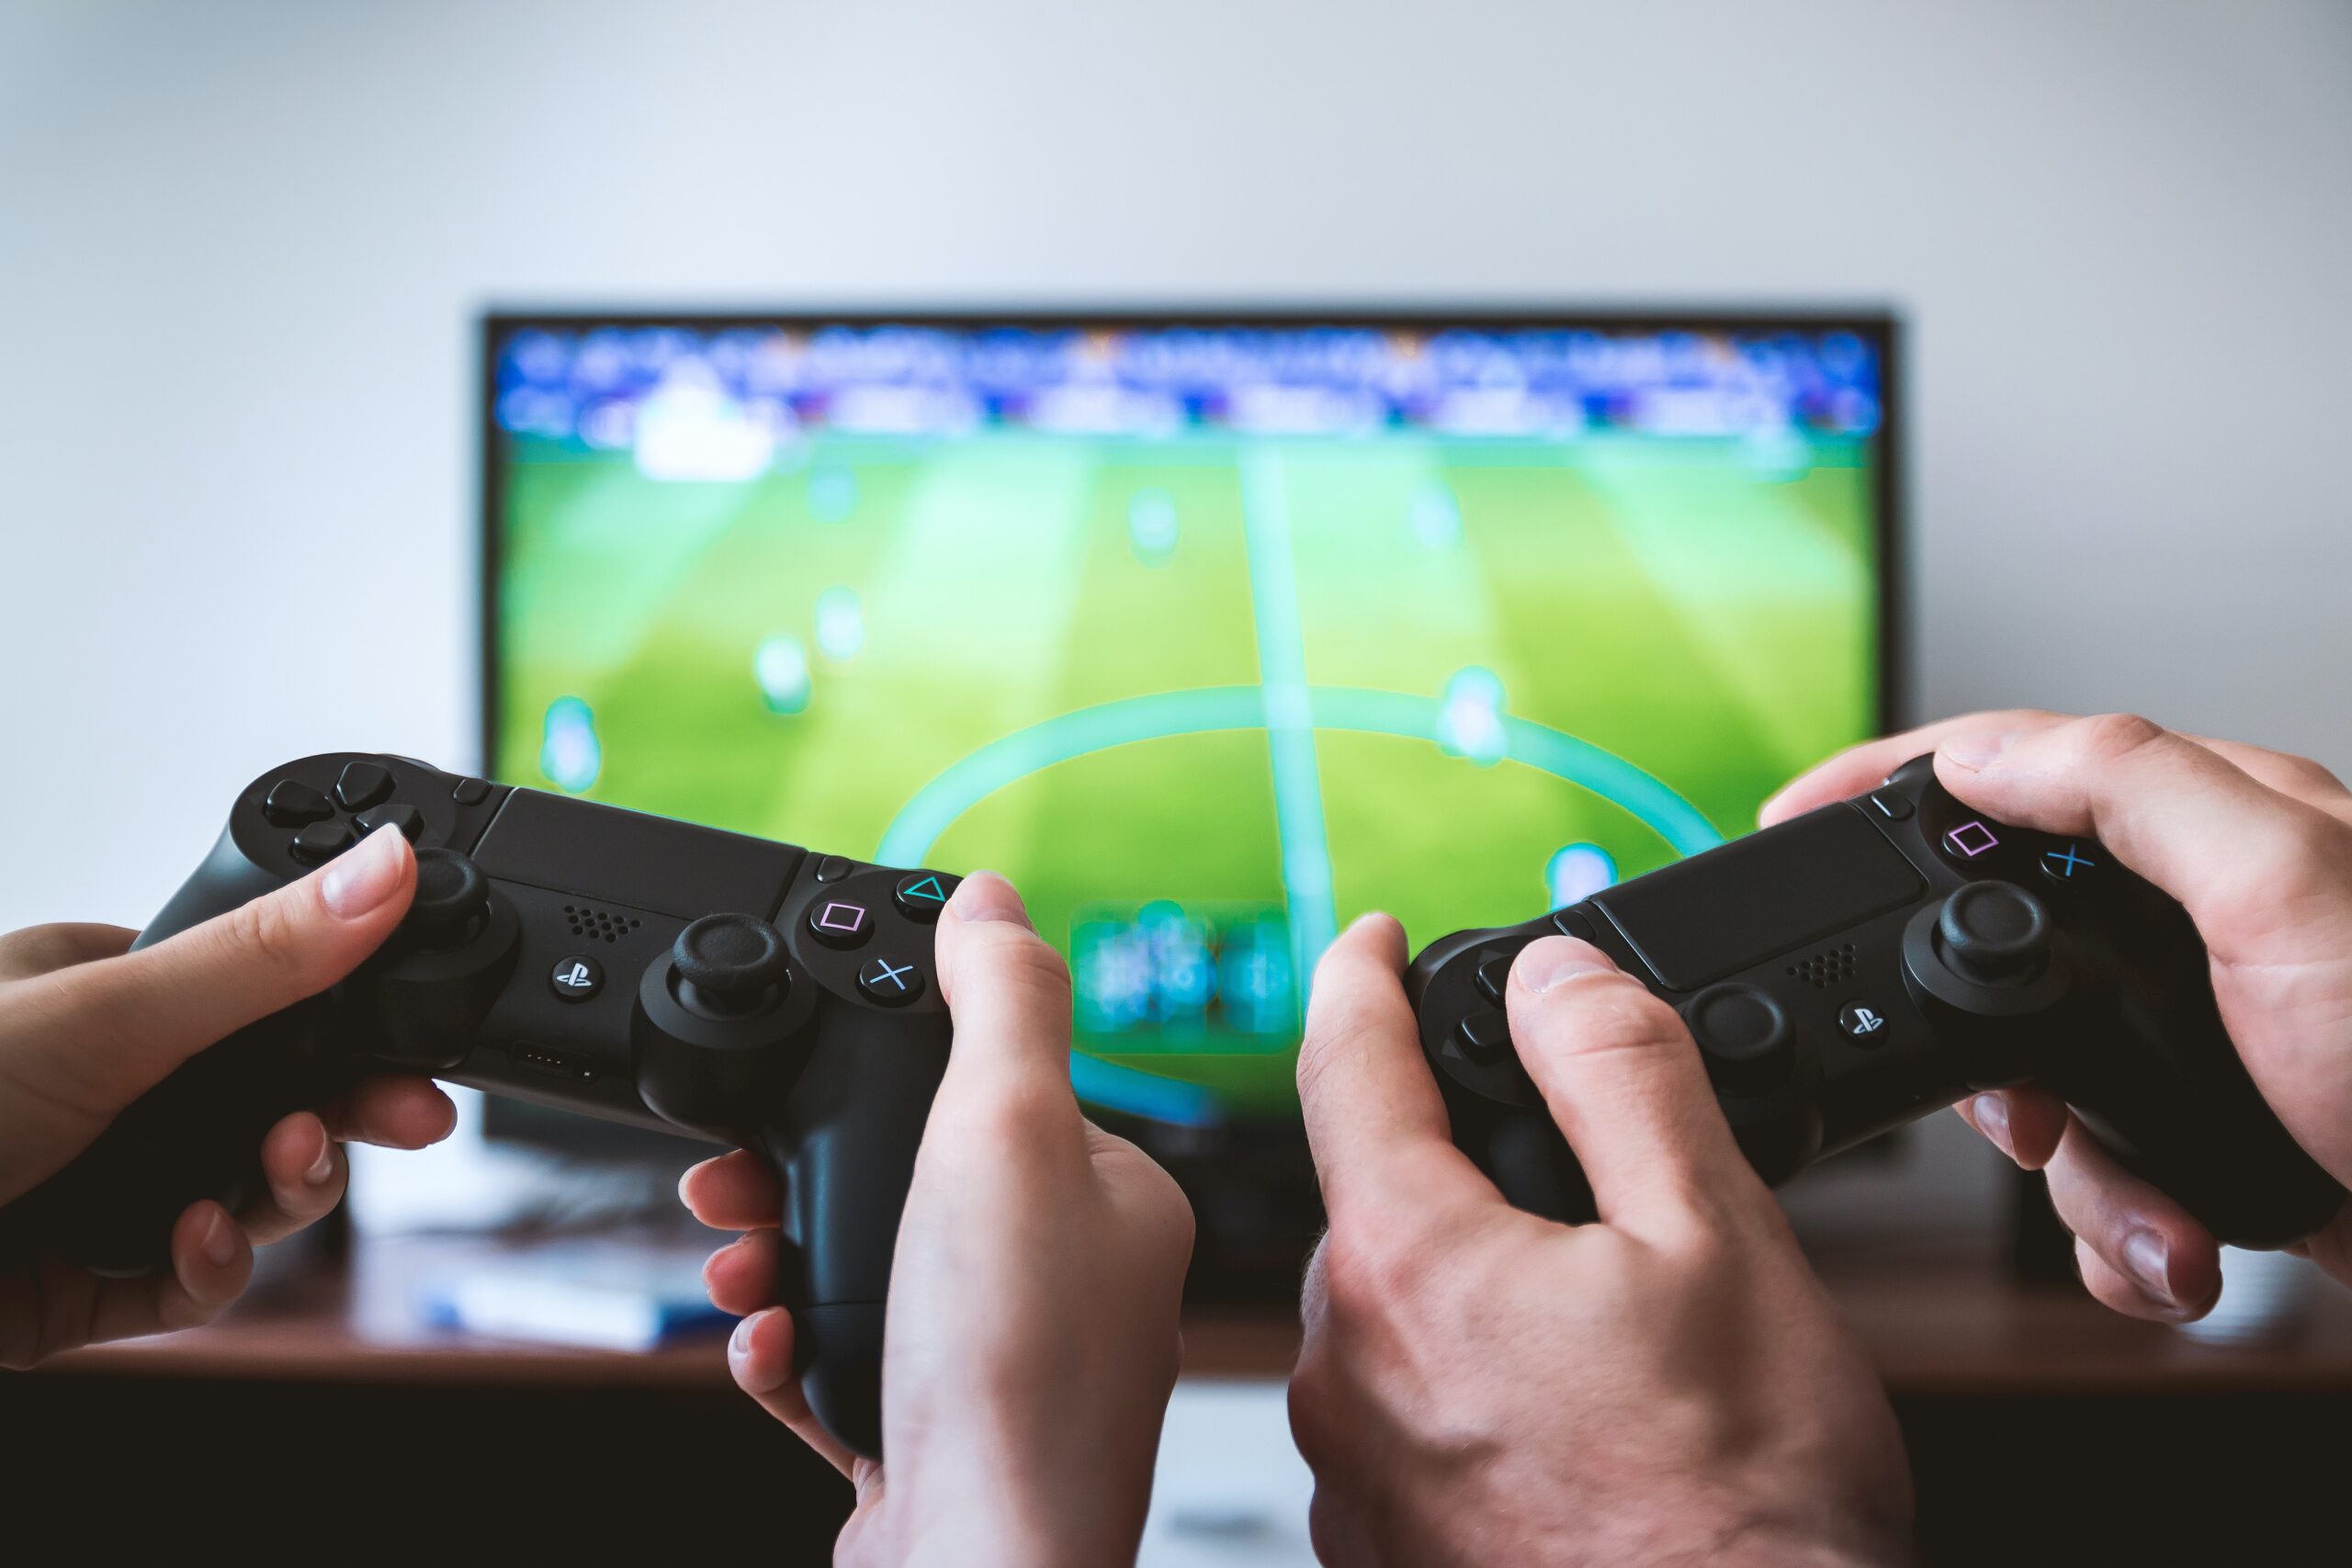 Two controllers being held in front of a TV playing FIFA